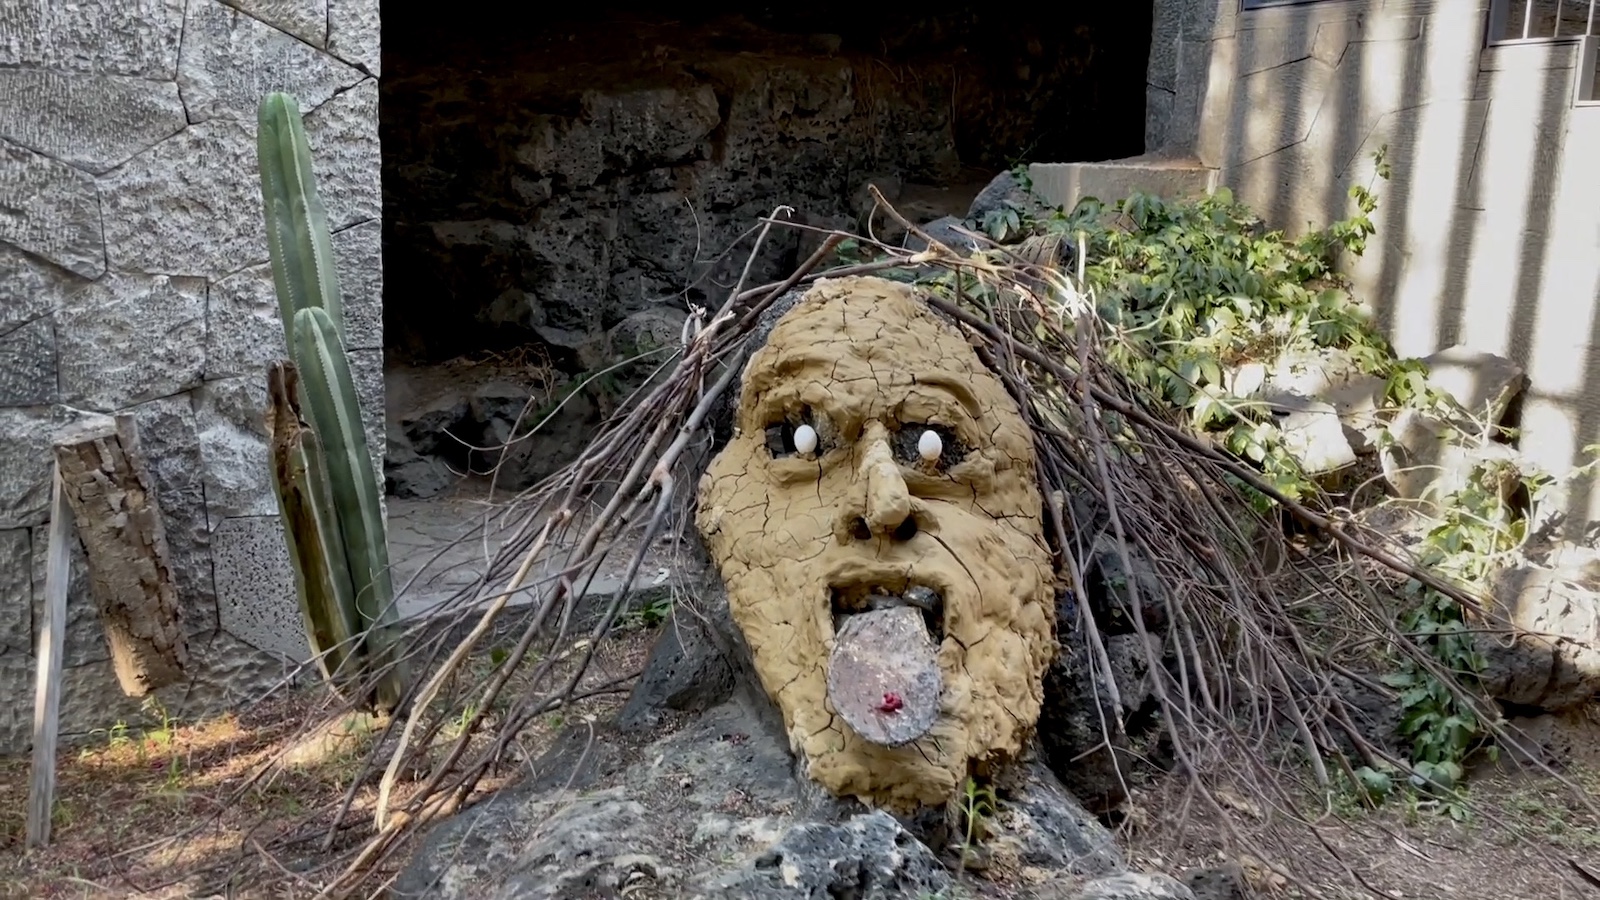 A witch face made out of a rock with grass for hair and its tongue sticking out